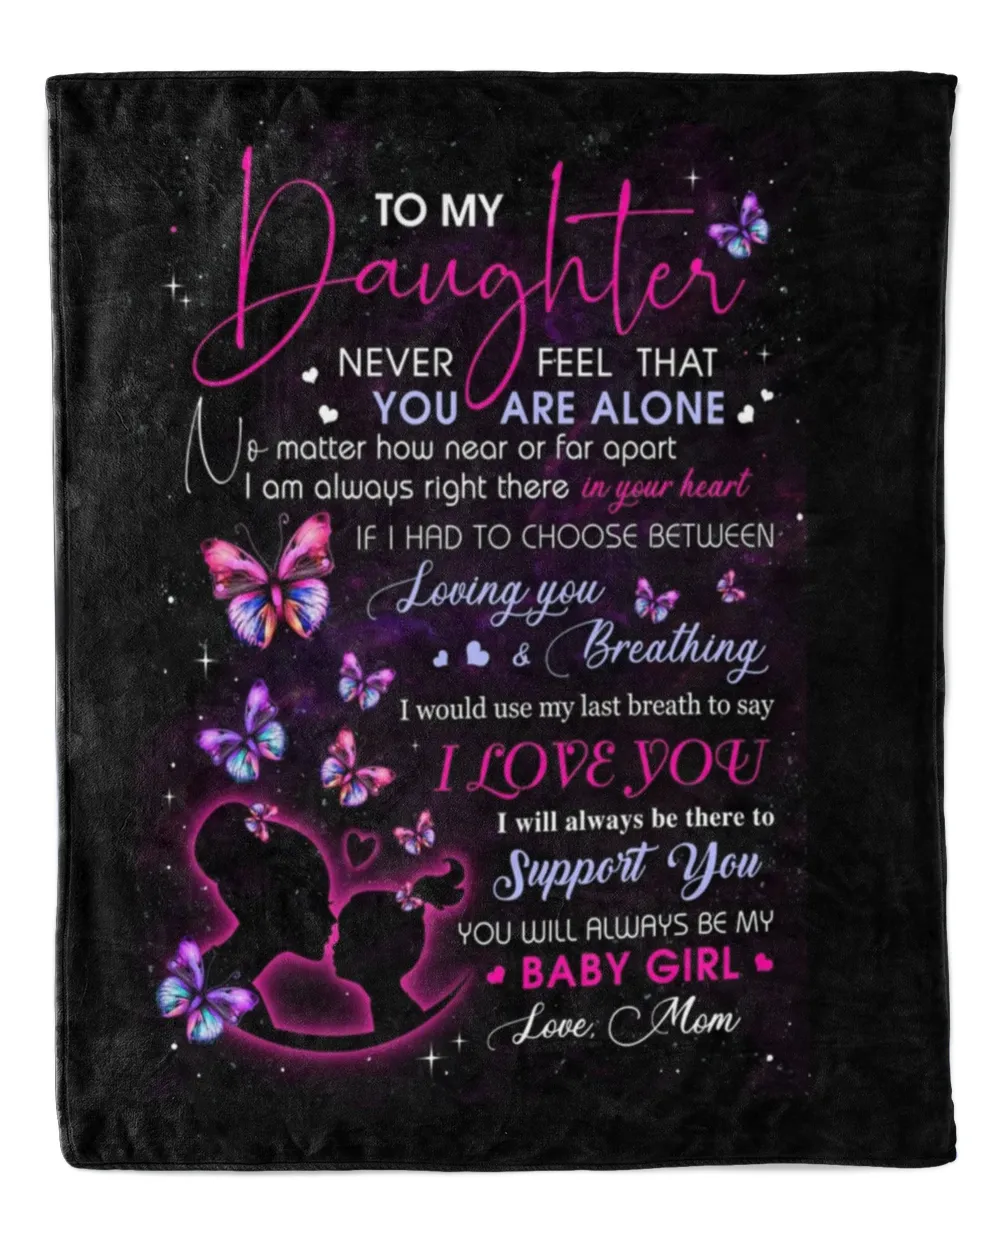 To My Daughter Not Alone Throw Blanket